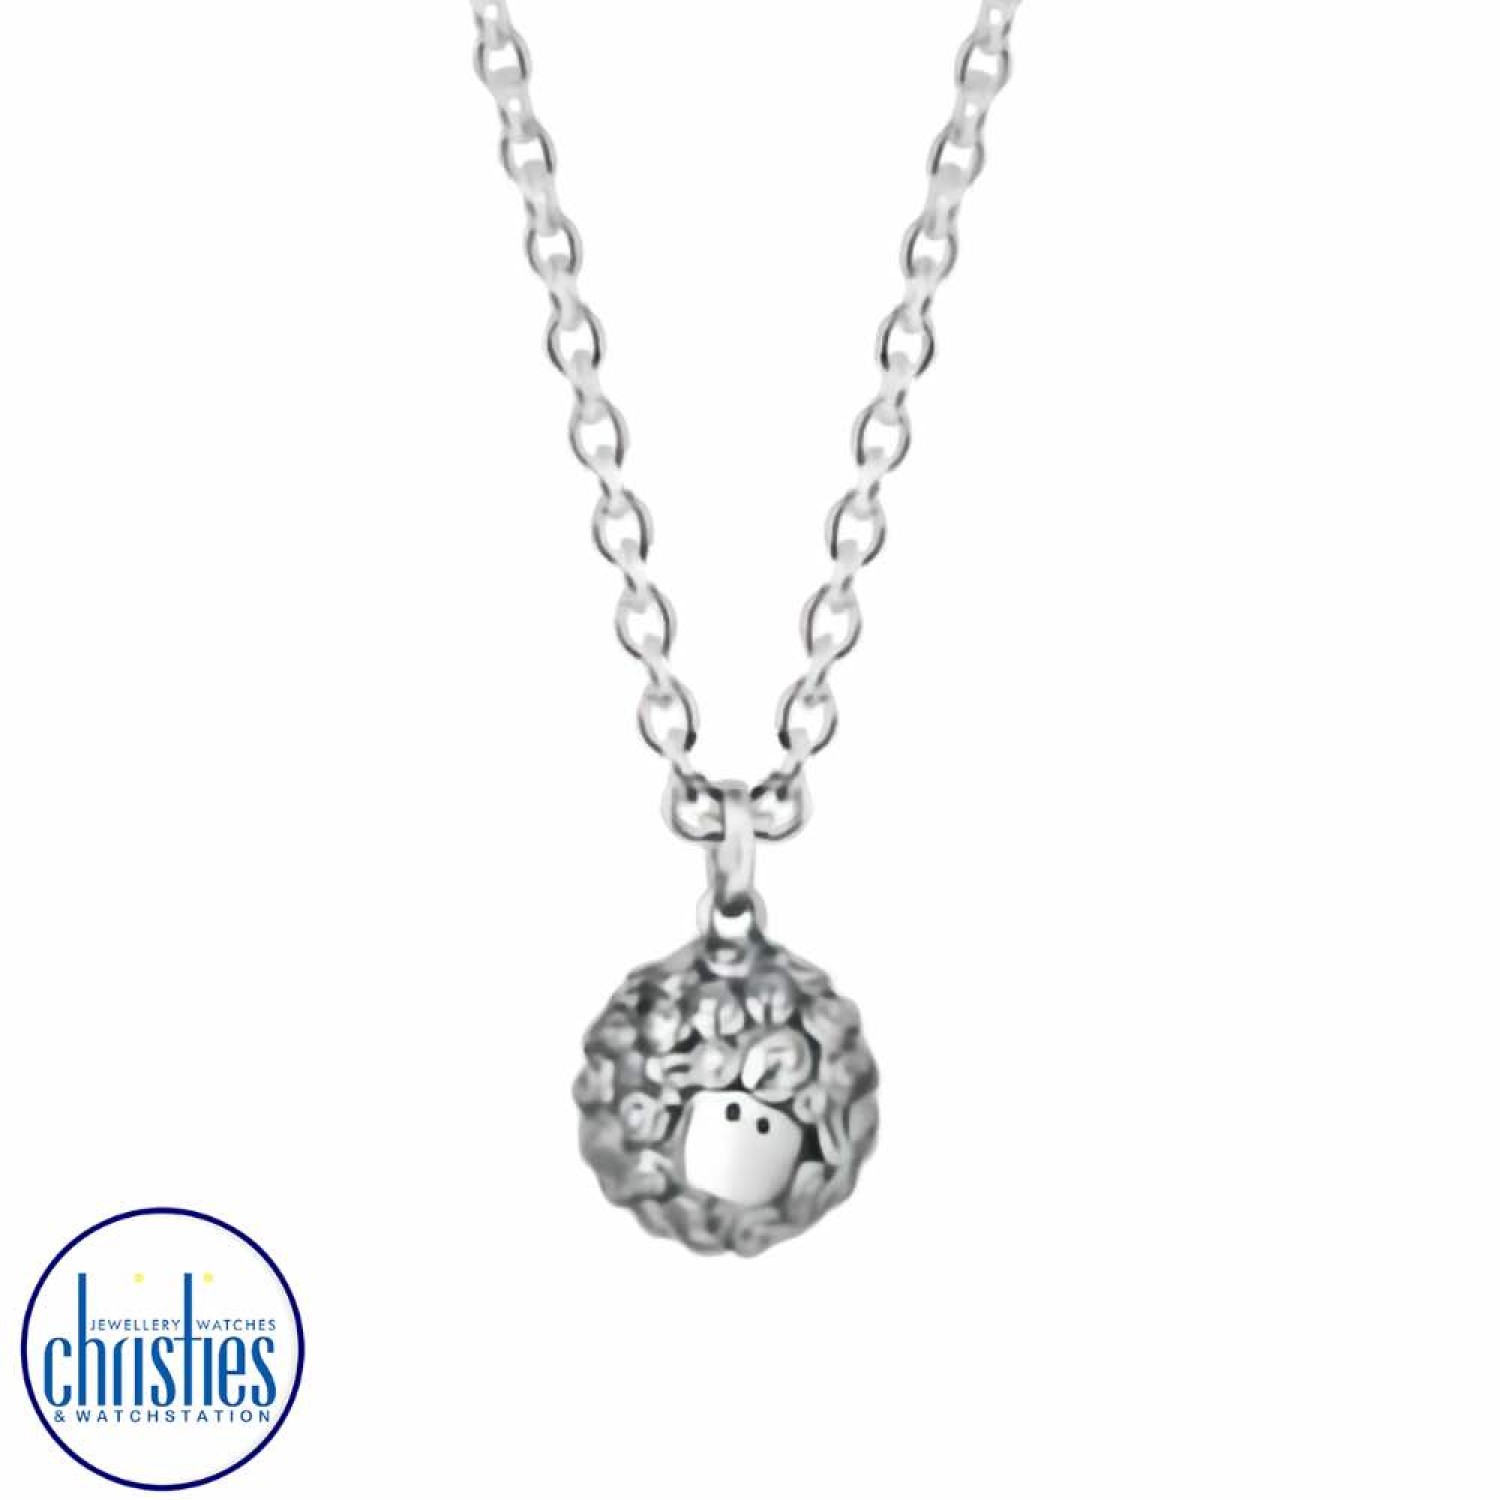 Farming Jewellery Silver Woolly Sheep Necklace. Celebrated as a country with more sheep than people, New Zealand is known globally for its sheep farming. horseshoe jewellery nz